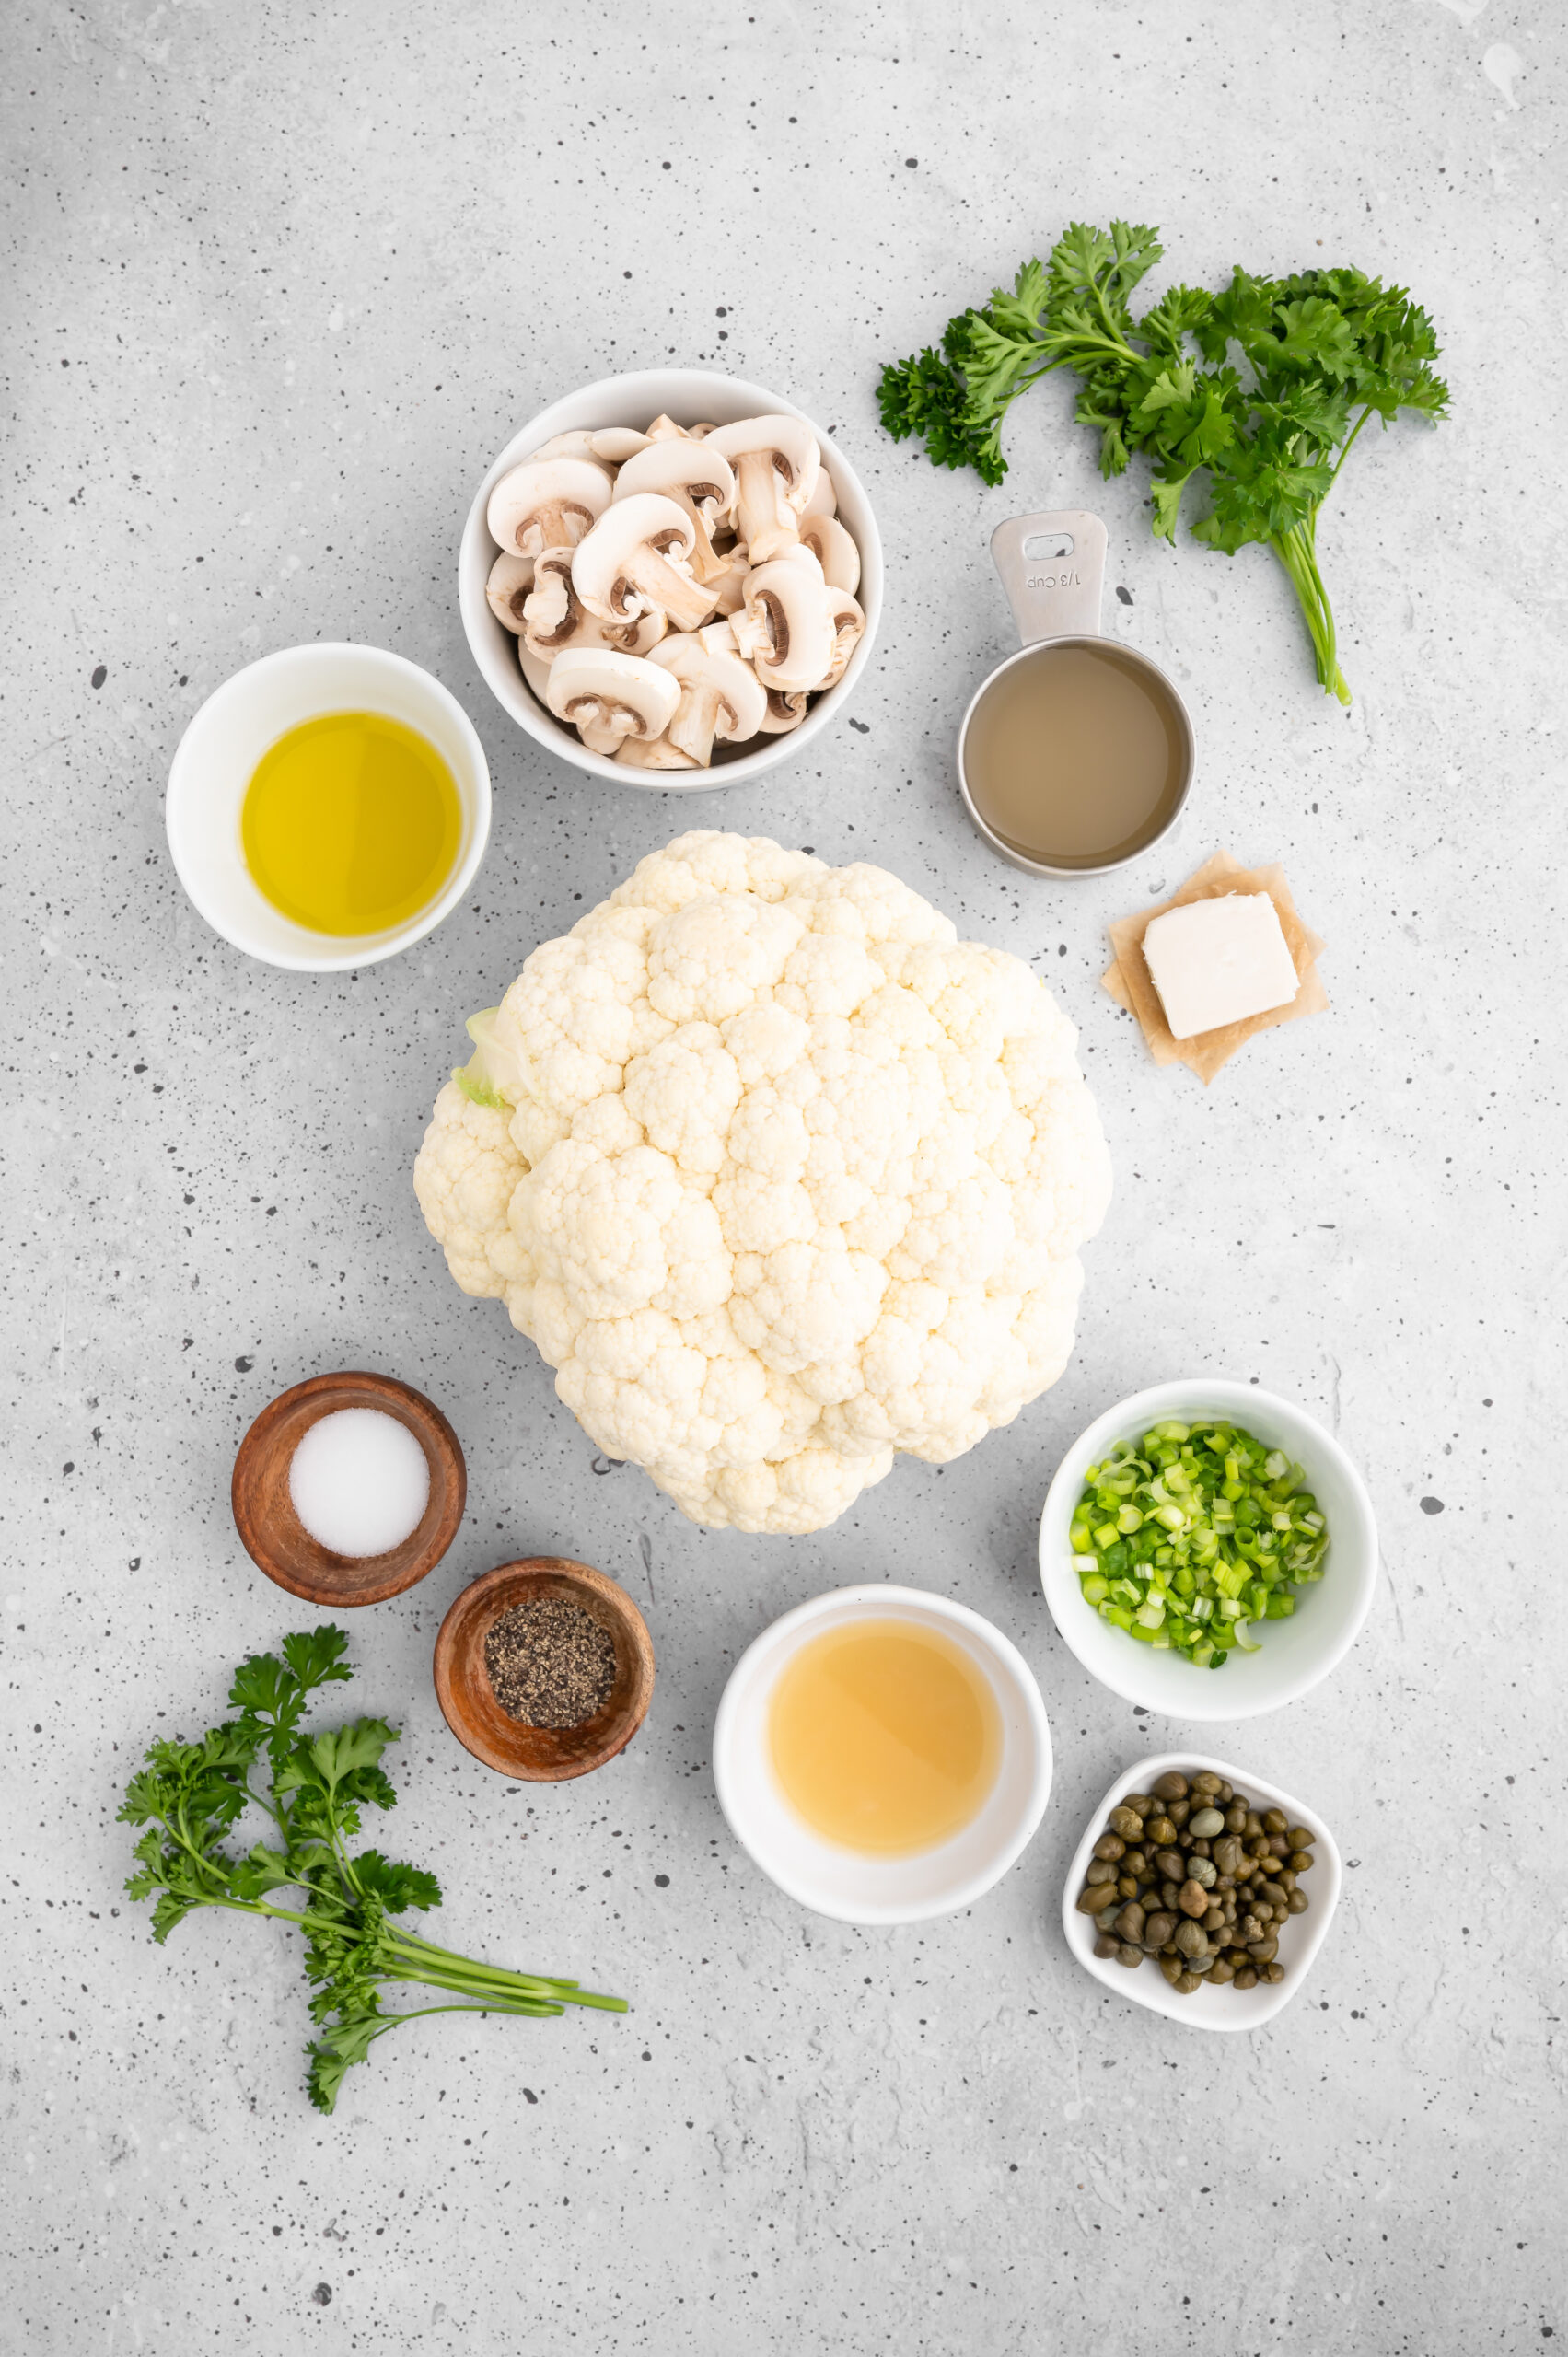 Ingredients for cauliflower steaks arranged on a countertop in various bowls.